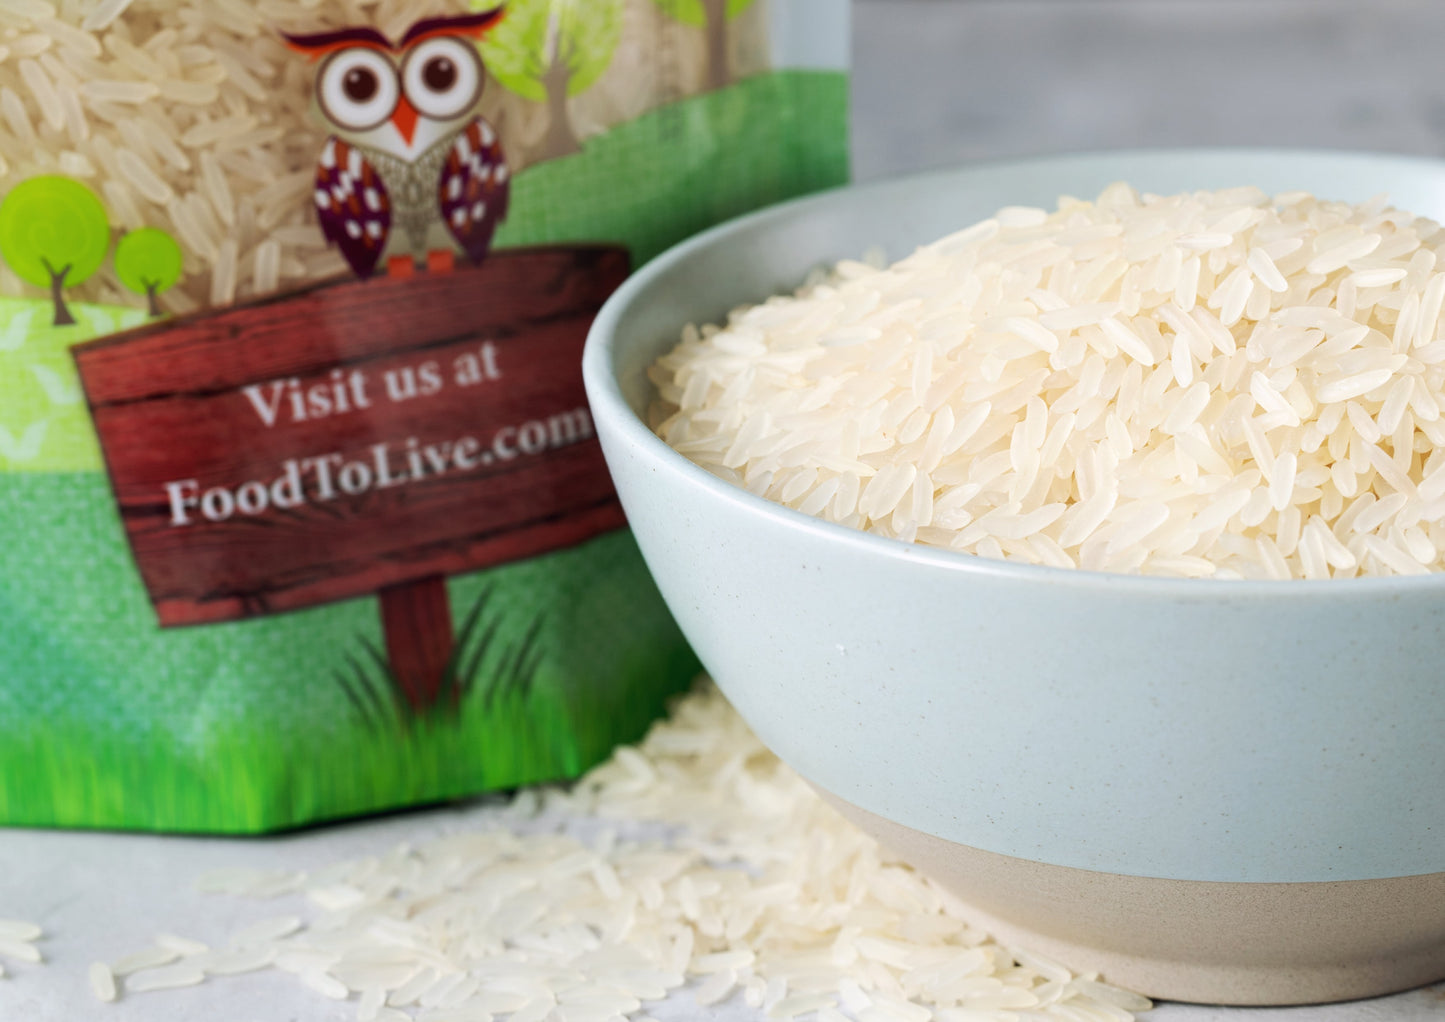 Organic Parboiled Long Grain White Rice - Non-GMO, Kosher, Vegan, Dried. Partially Precooked Converted Rice,Easy-cook Rice - by Food to Live